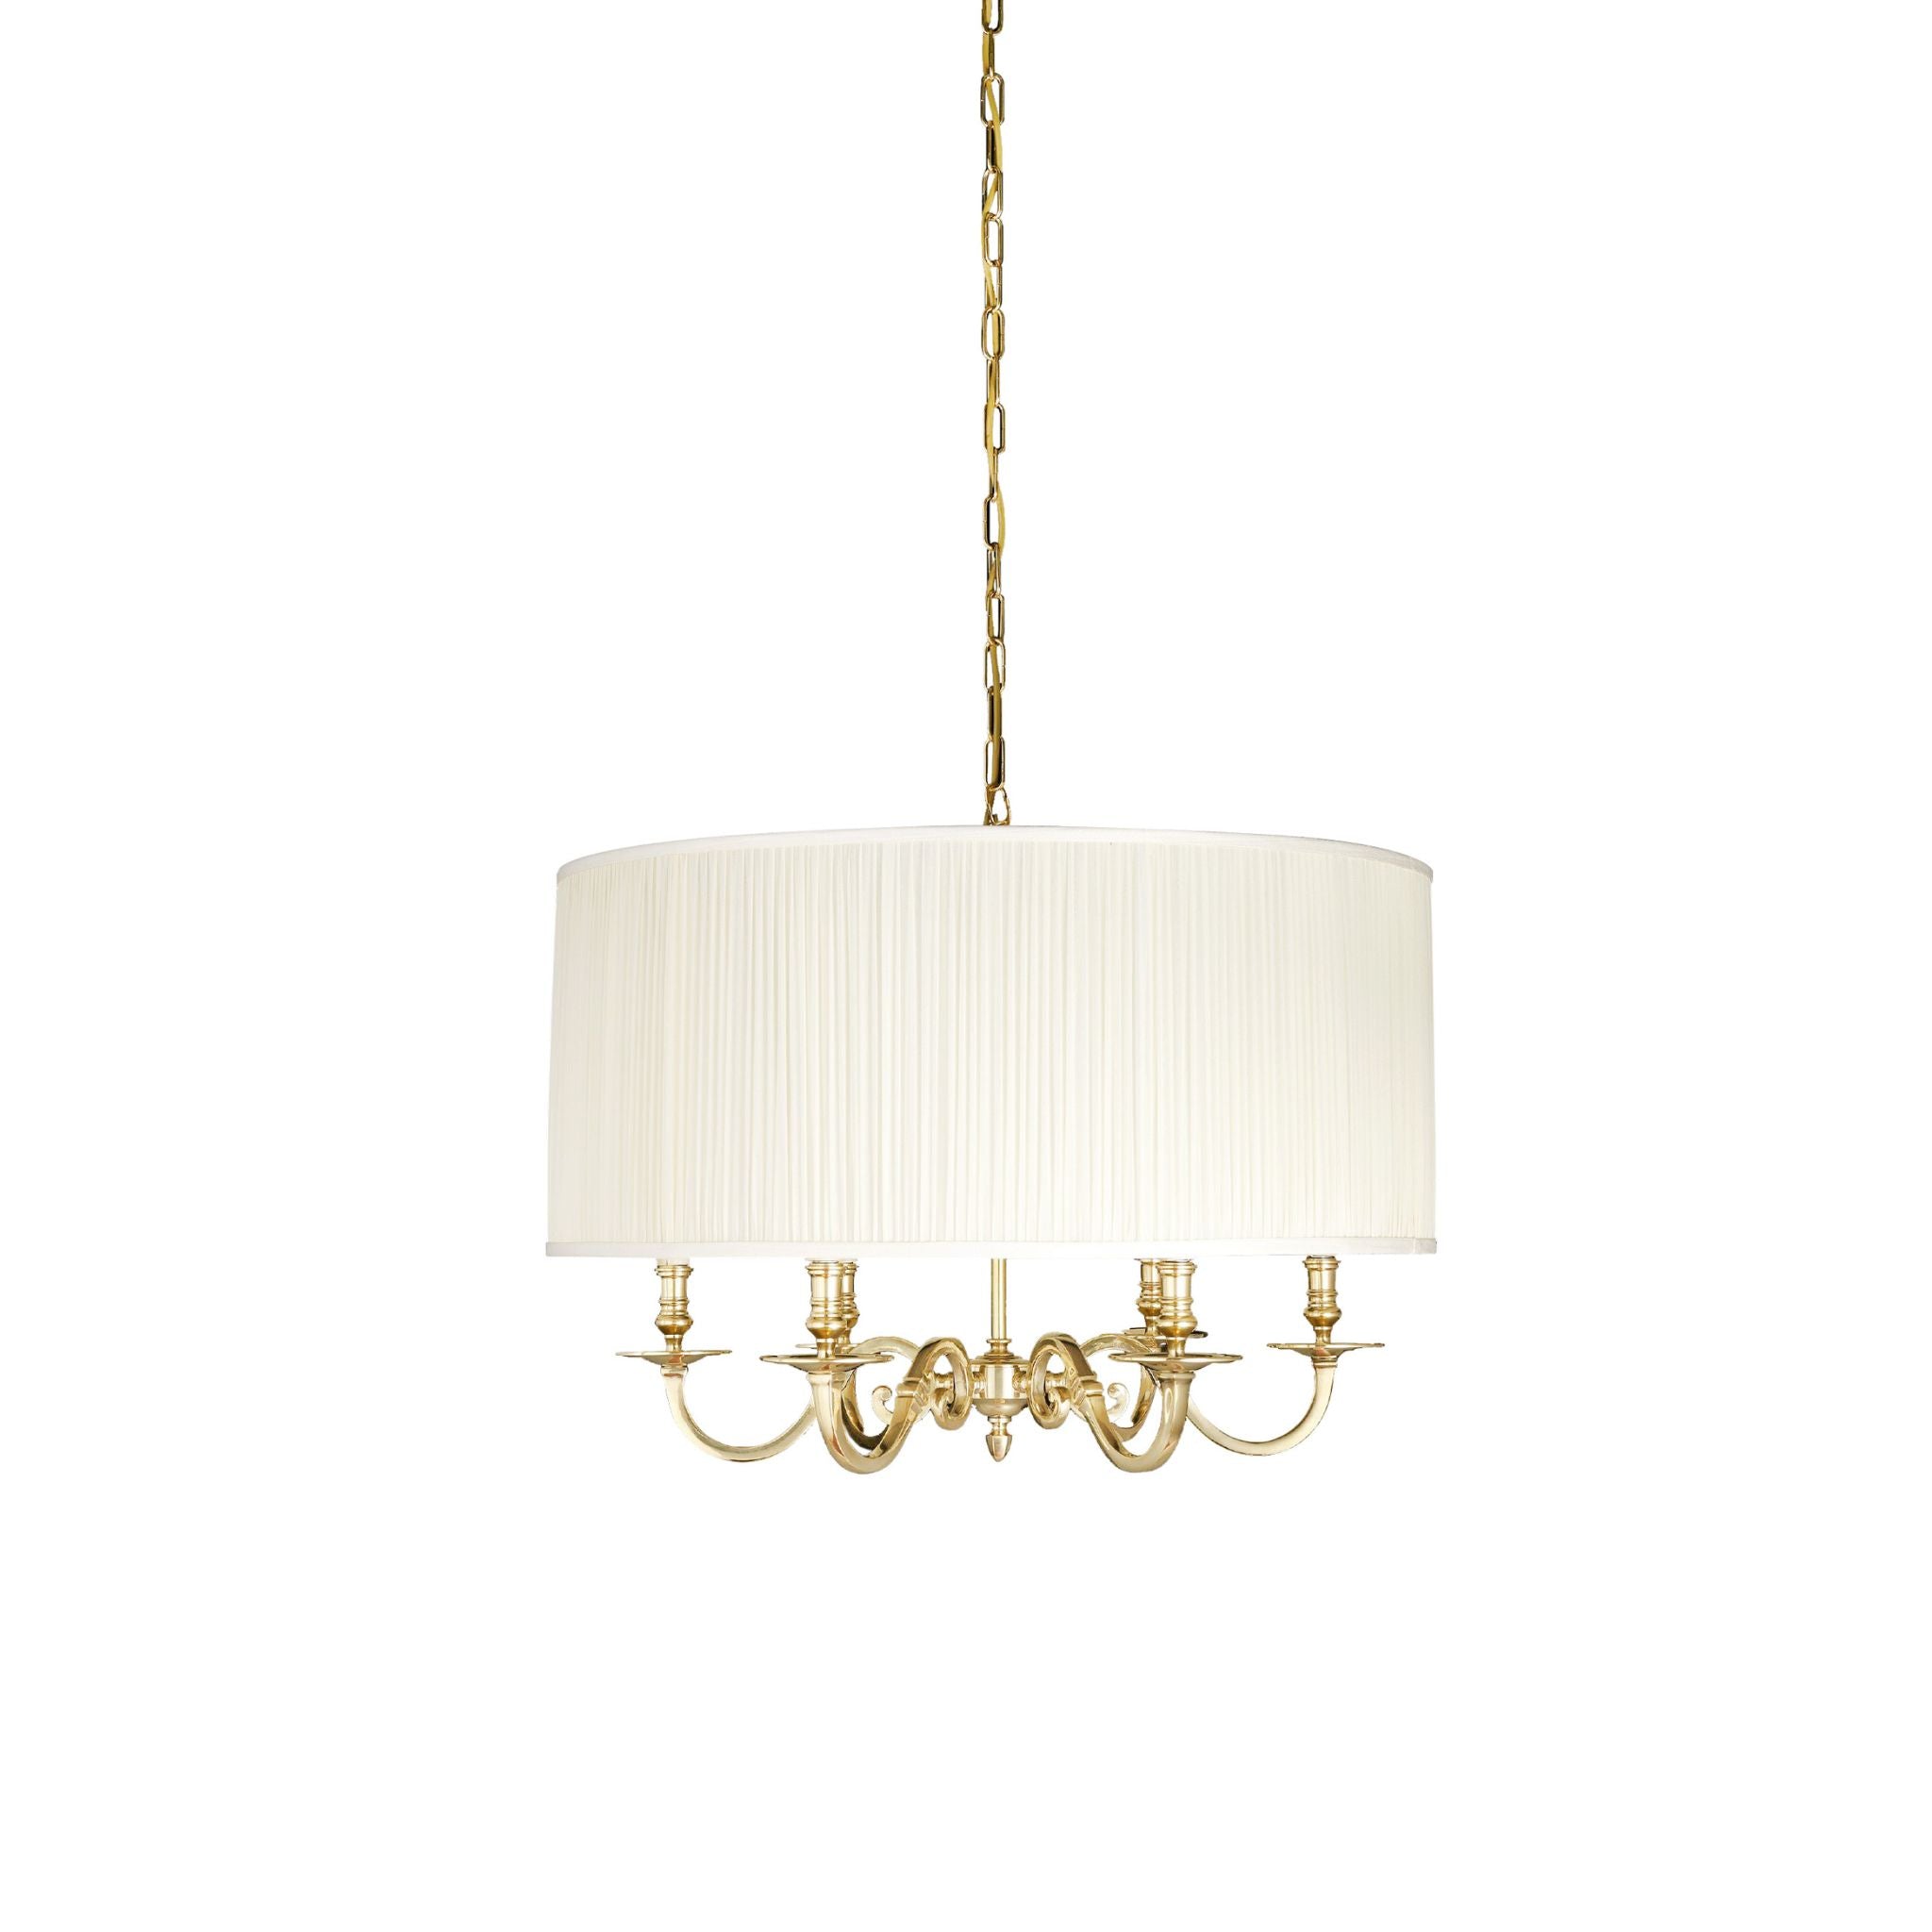 Novecento brass chandelier six lights with fabric lampshade - ilbronzetto